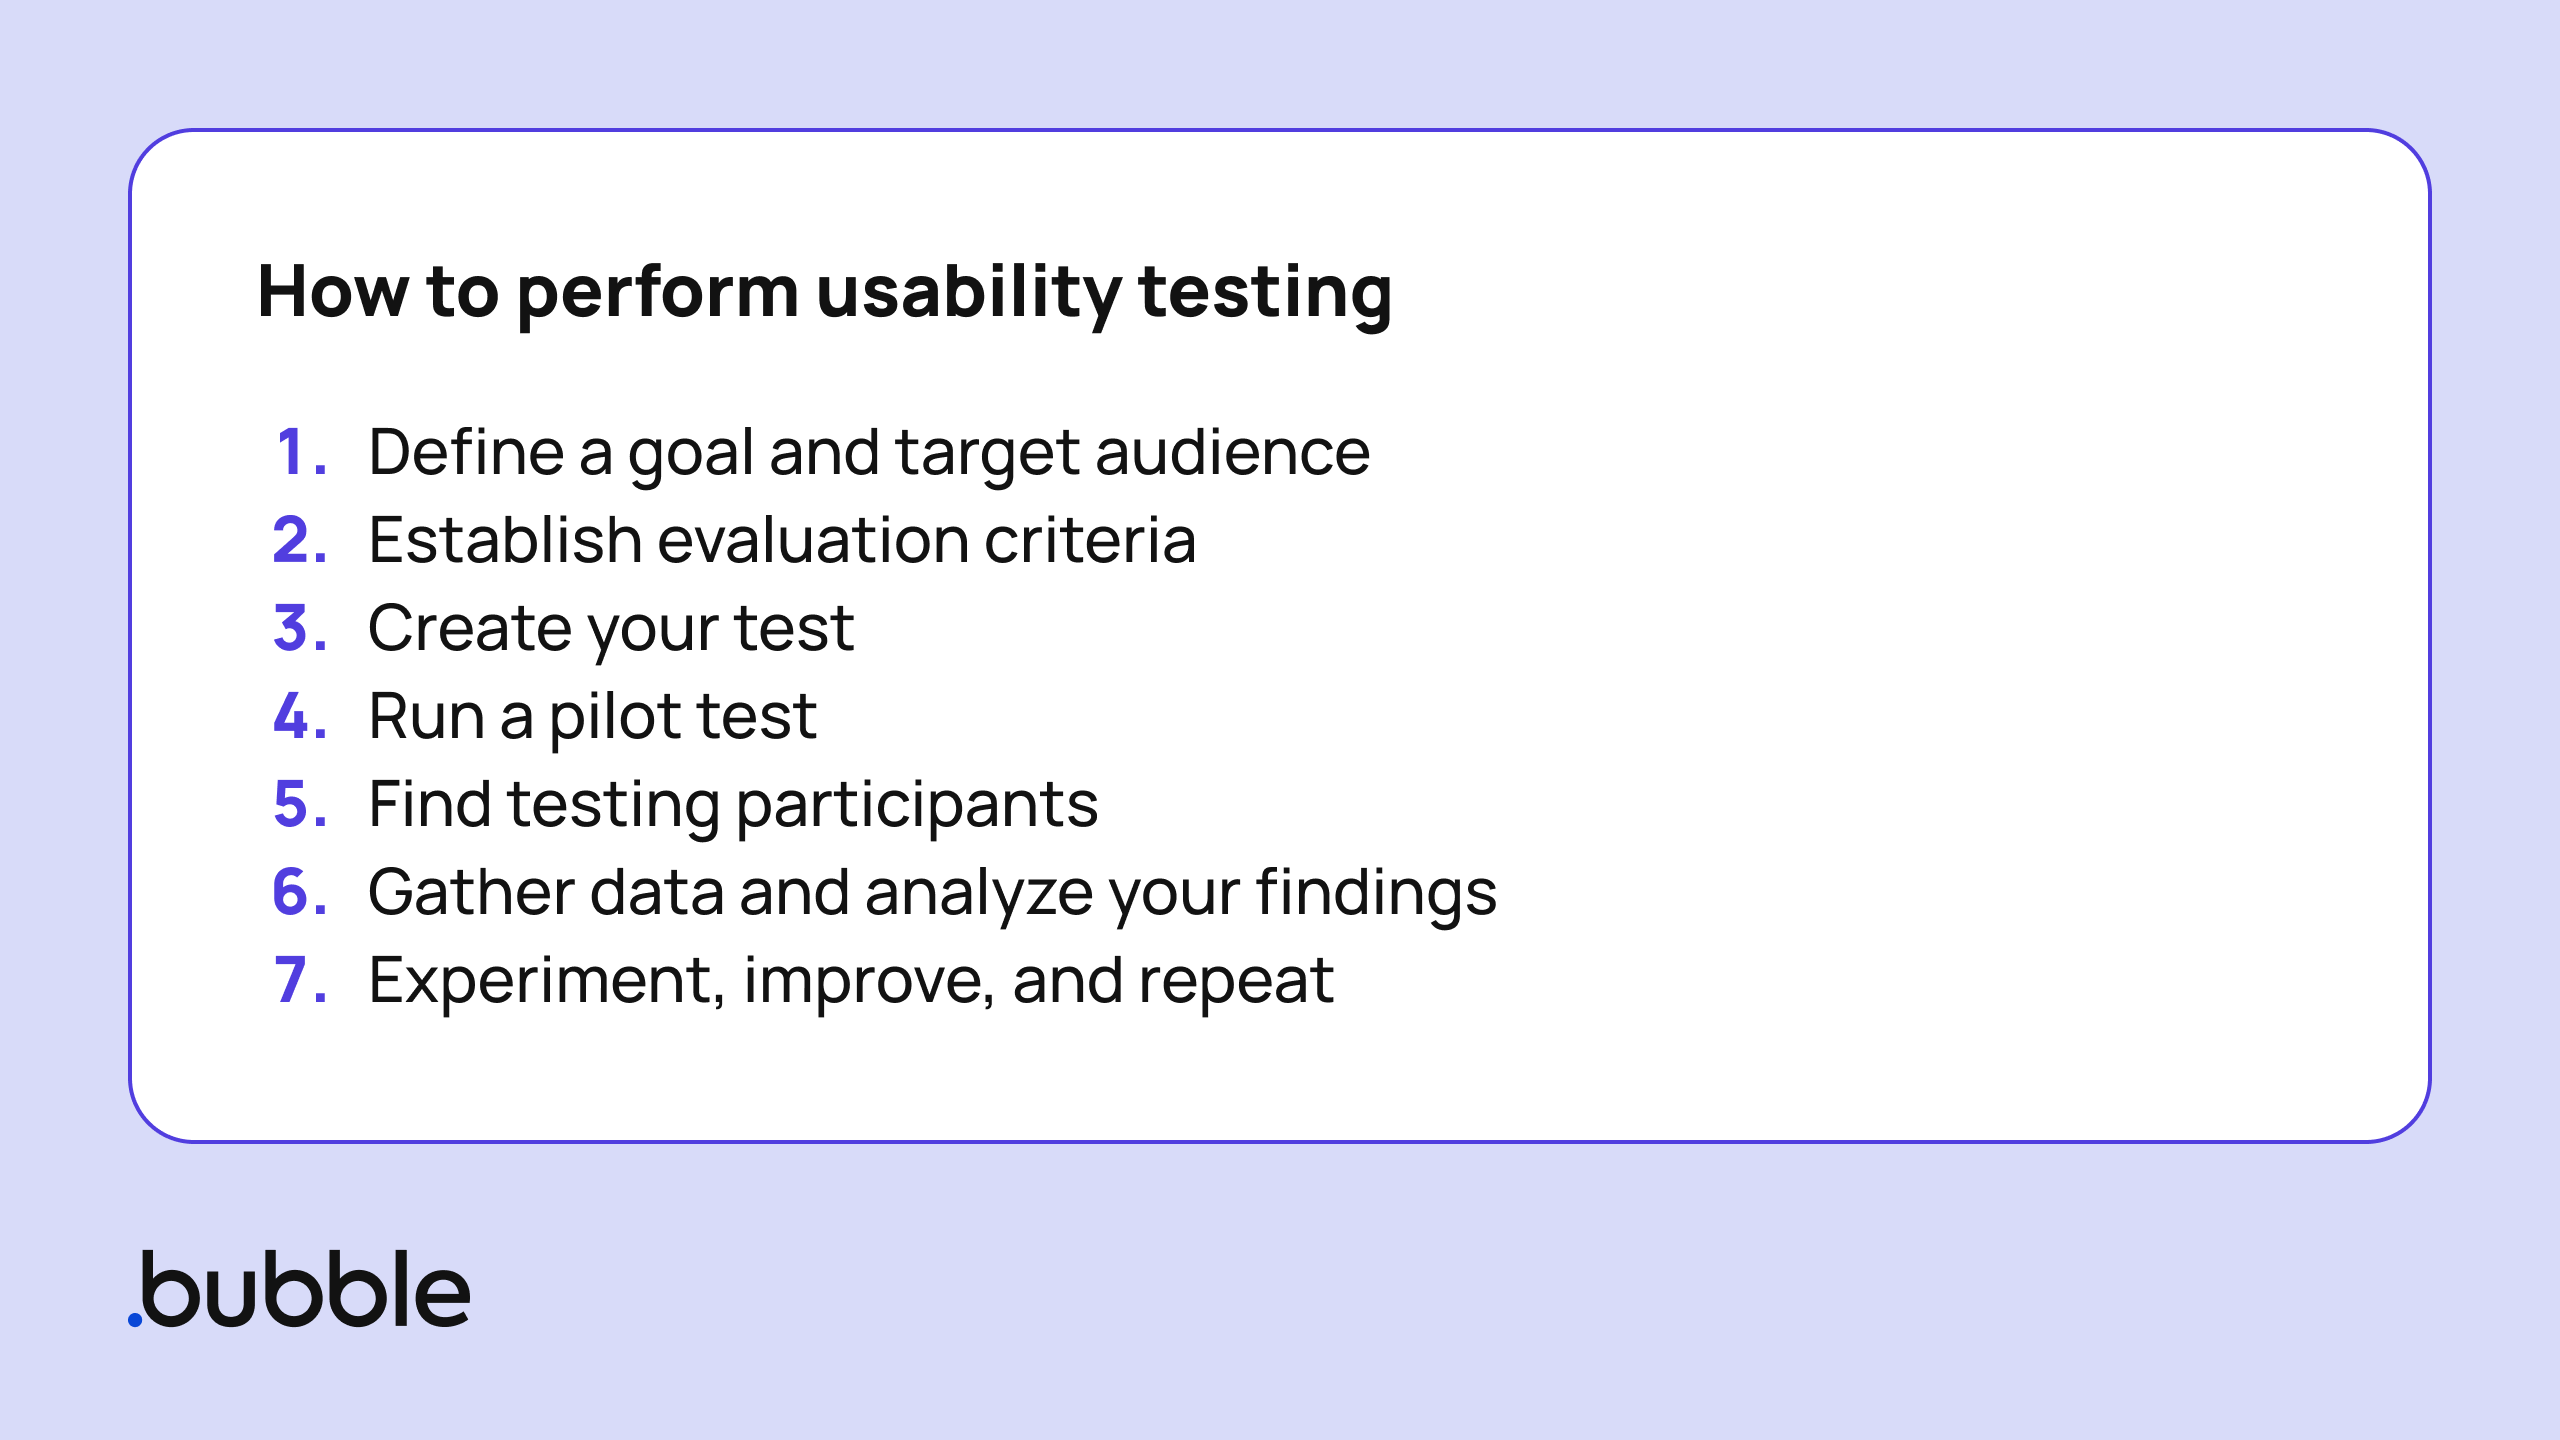 A graphic that shows the 7 steps for performing usability testing.